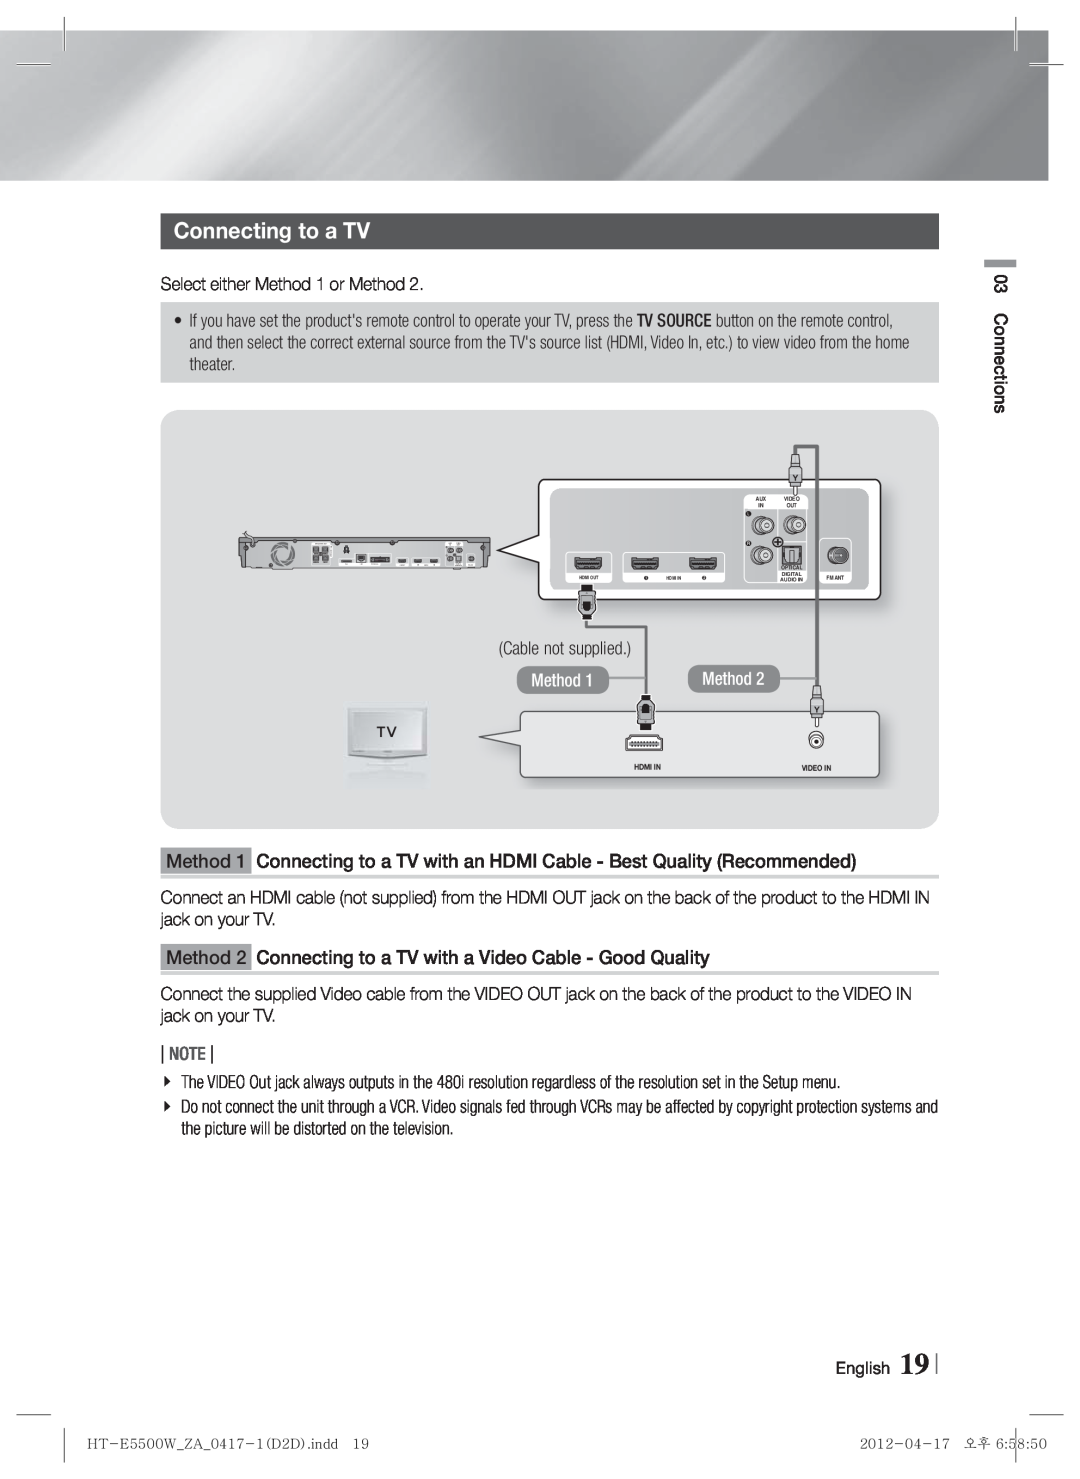 Samsung HT-E550 user manual Connecting to a TV, Method, Note 